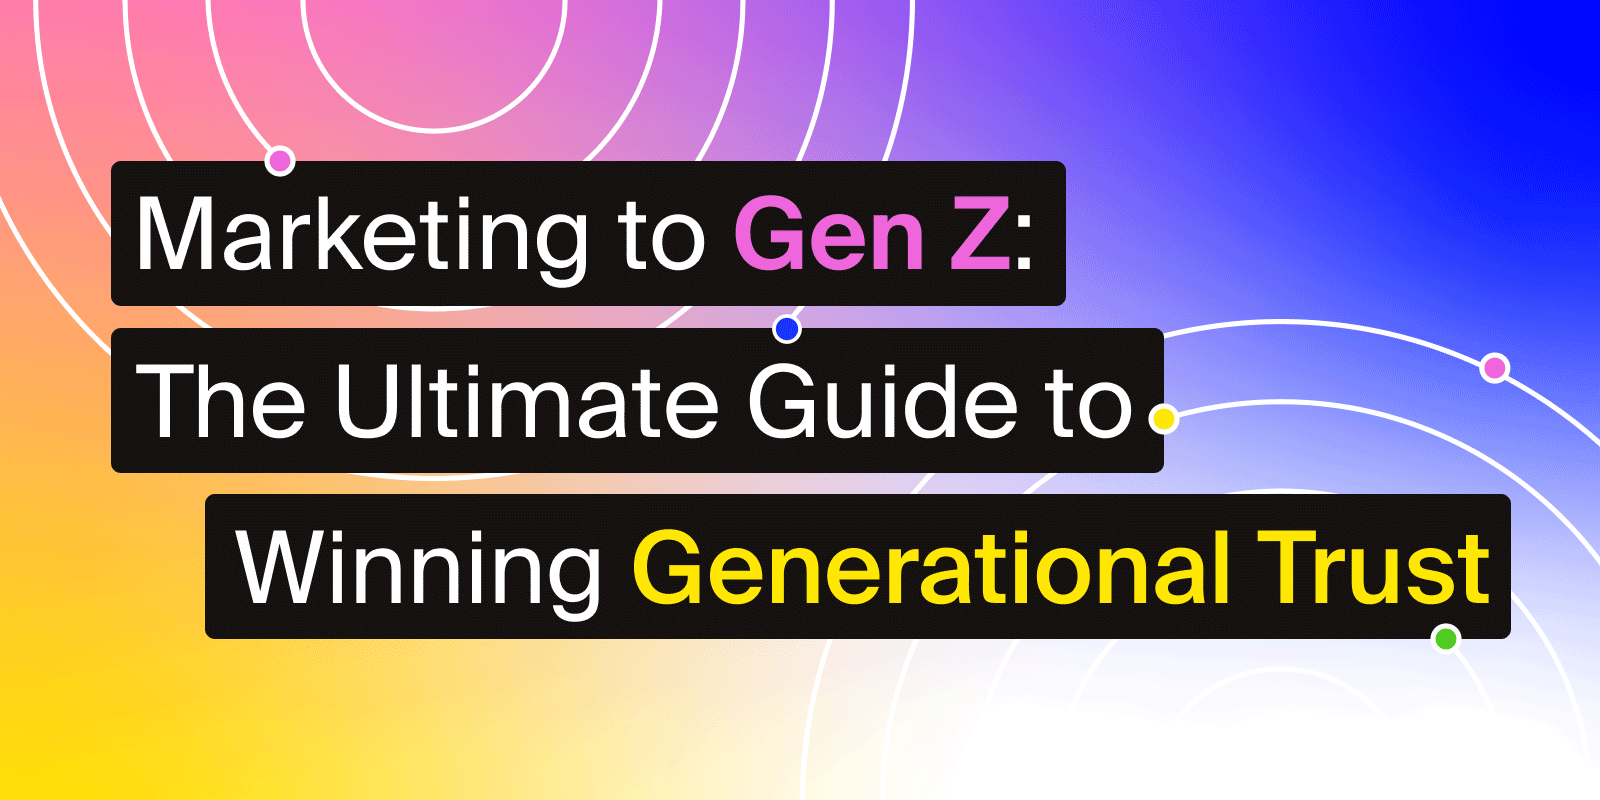 Marketing to Gen-Z: The Ultimate Guide to Winning Generational Trust